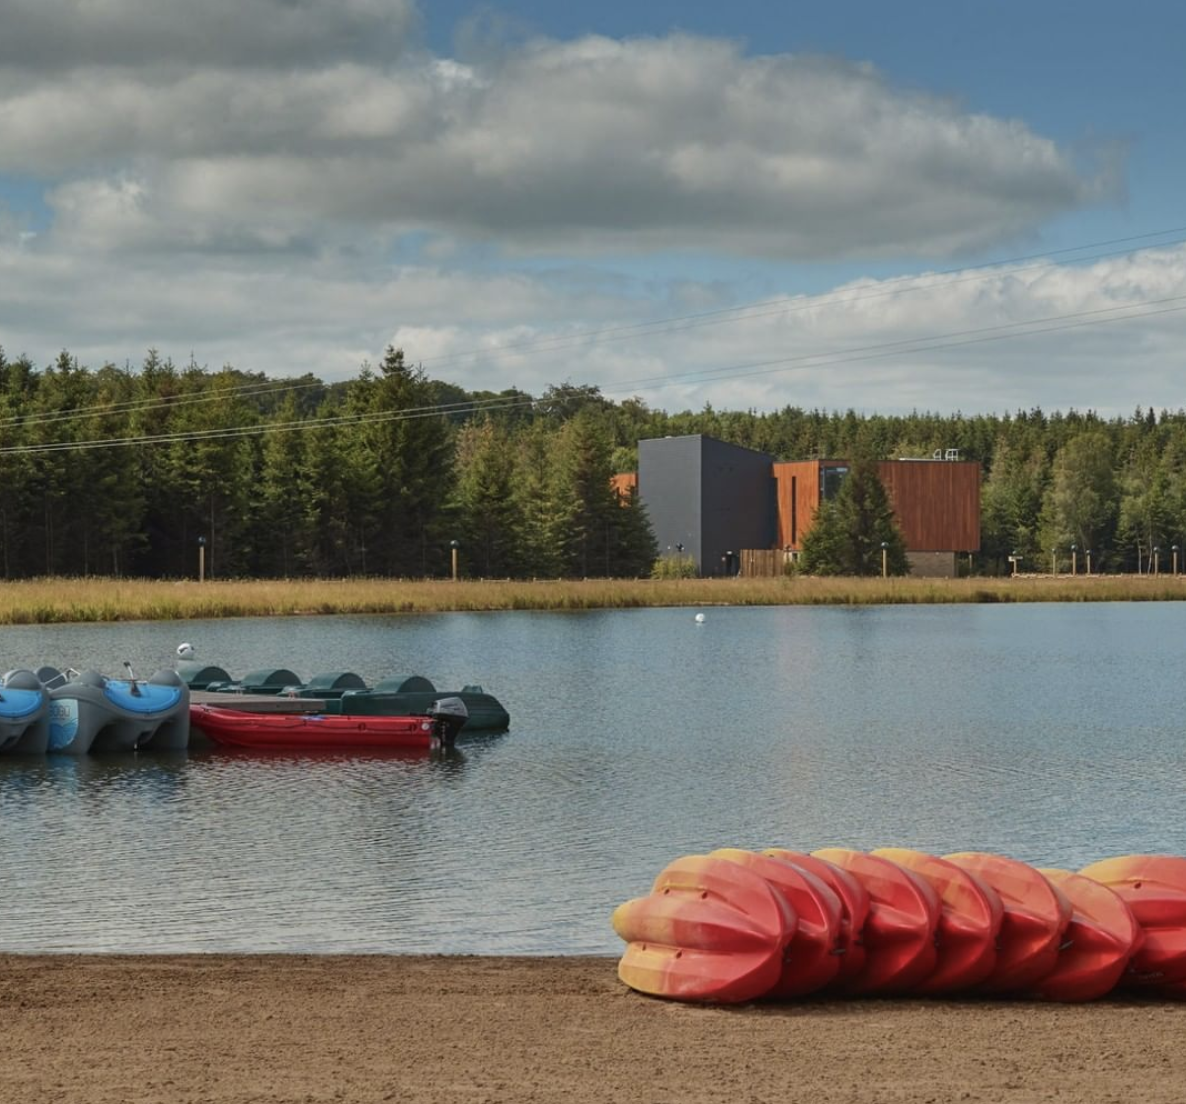 Center Parcs Ireland to begin work on a new inflatable floating play area